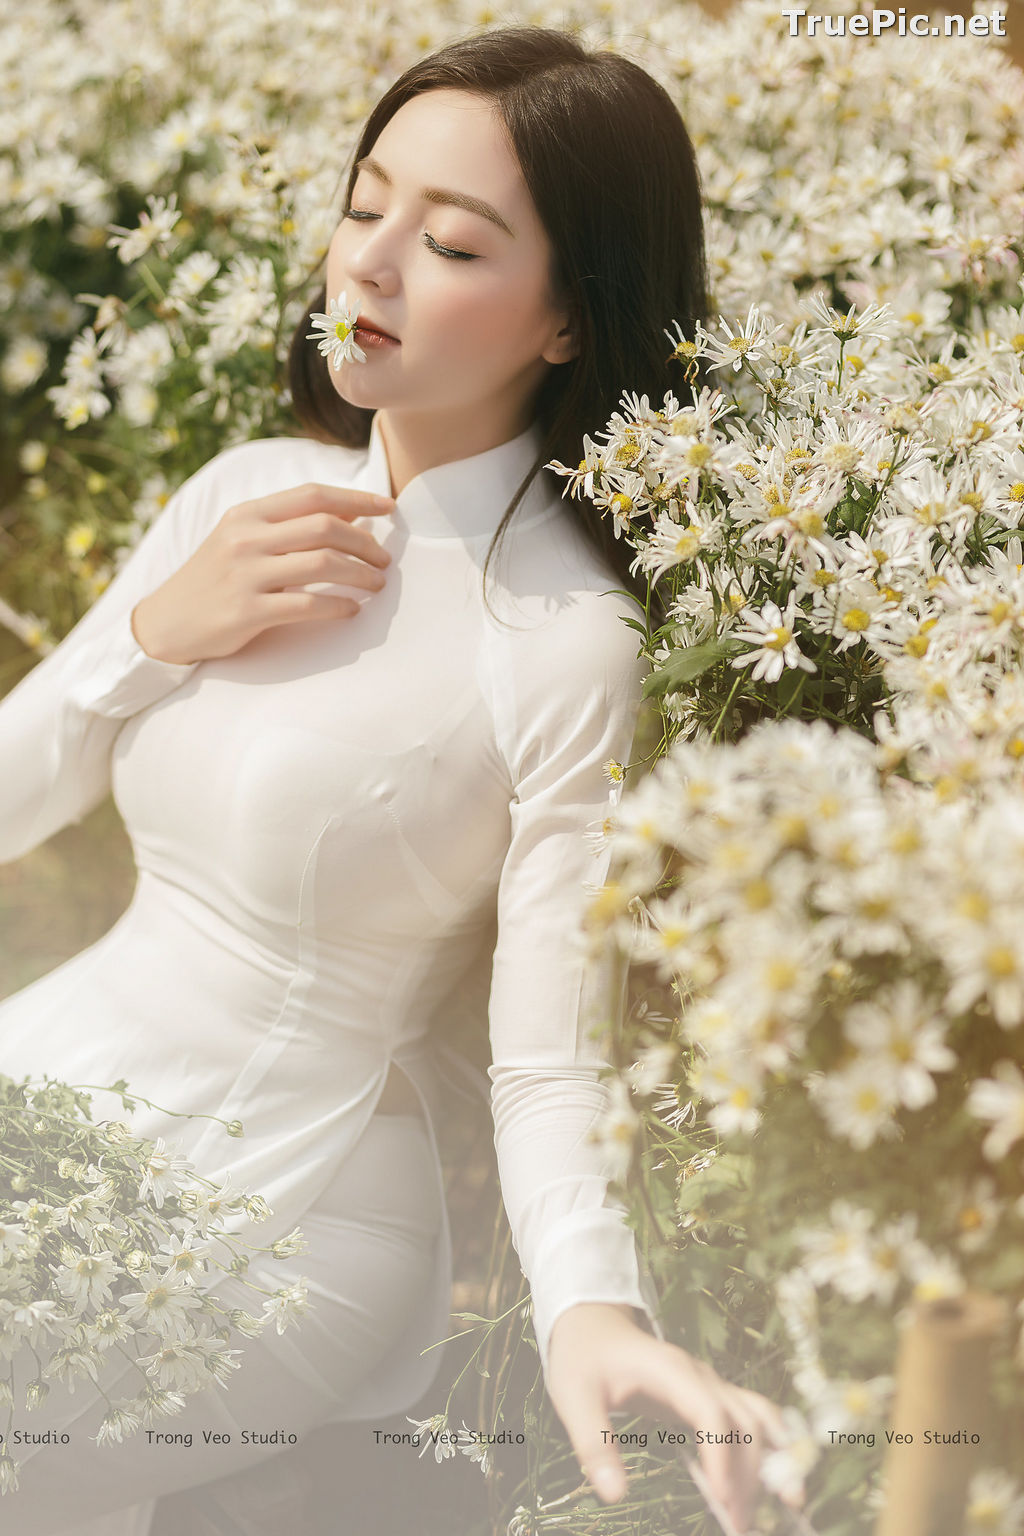 Image The Beauty of Vietnamese Girls with Traditional Dress (Ao Dai) #3 - TruePic.net - Picture-29